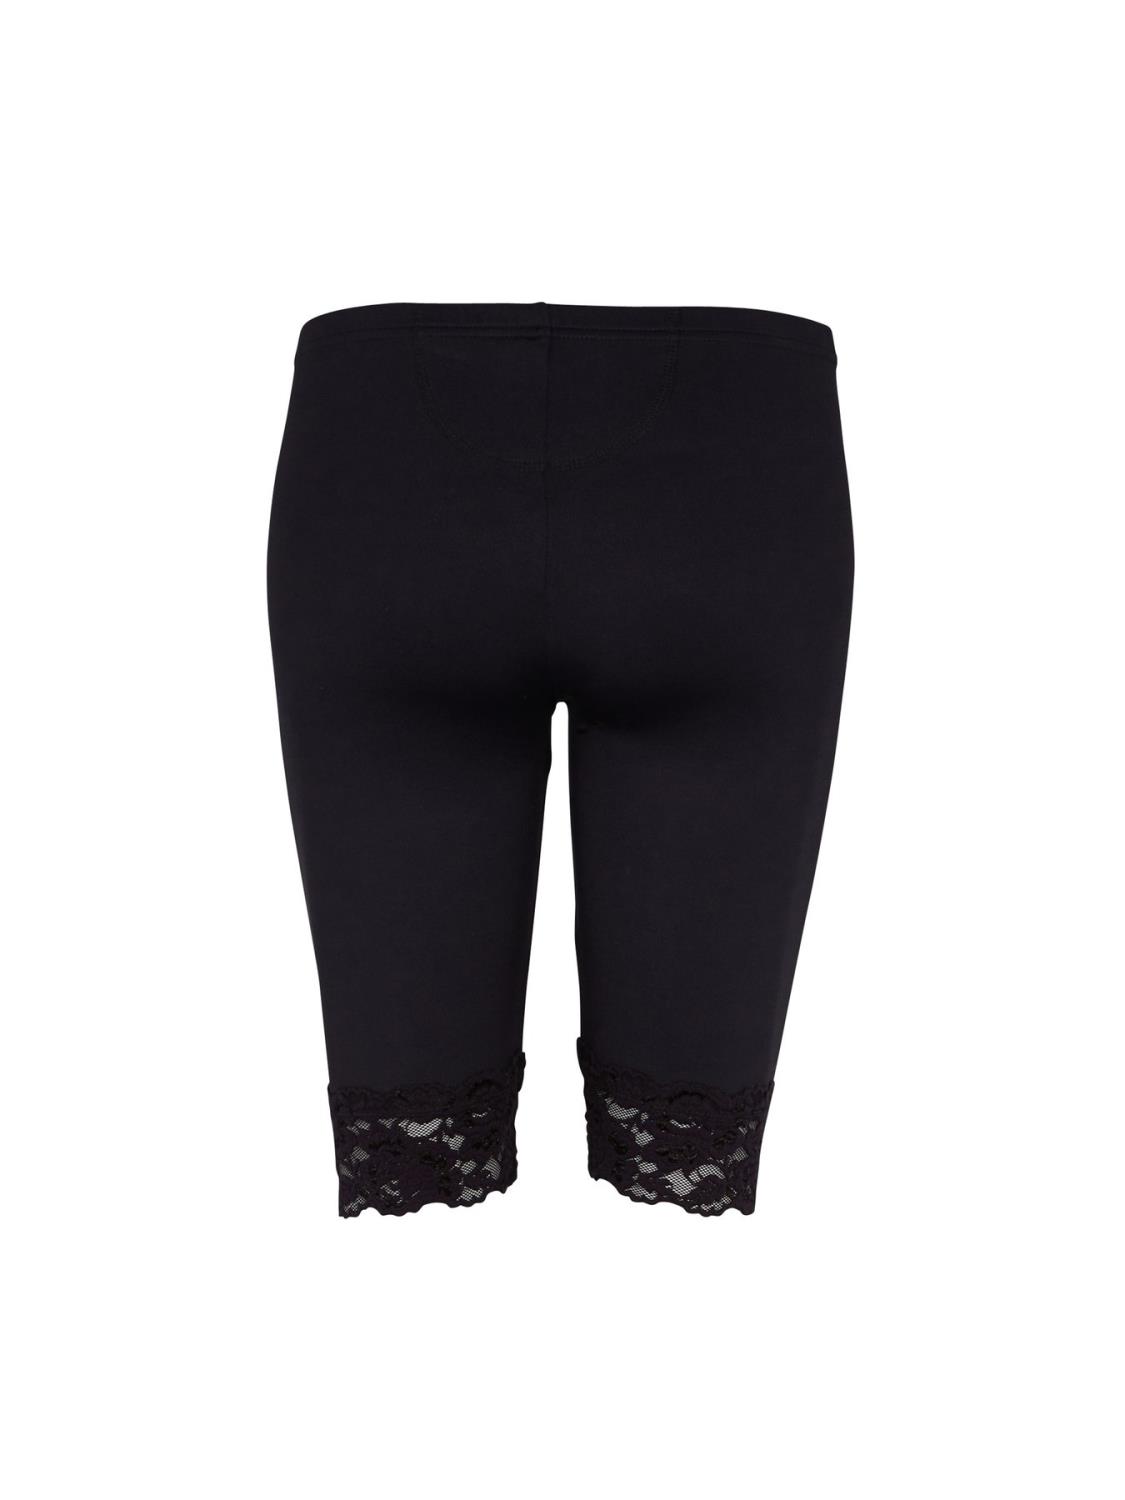 NÜ Isa Biker Shorts with lace